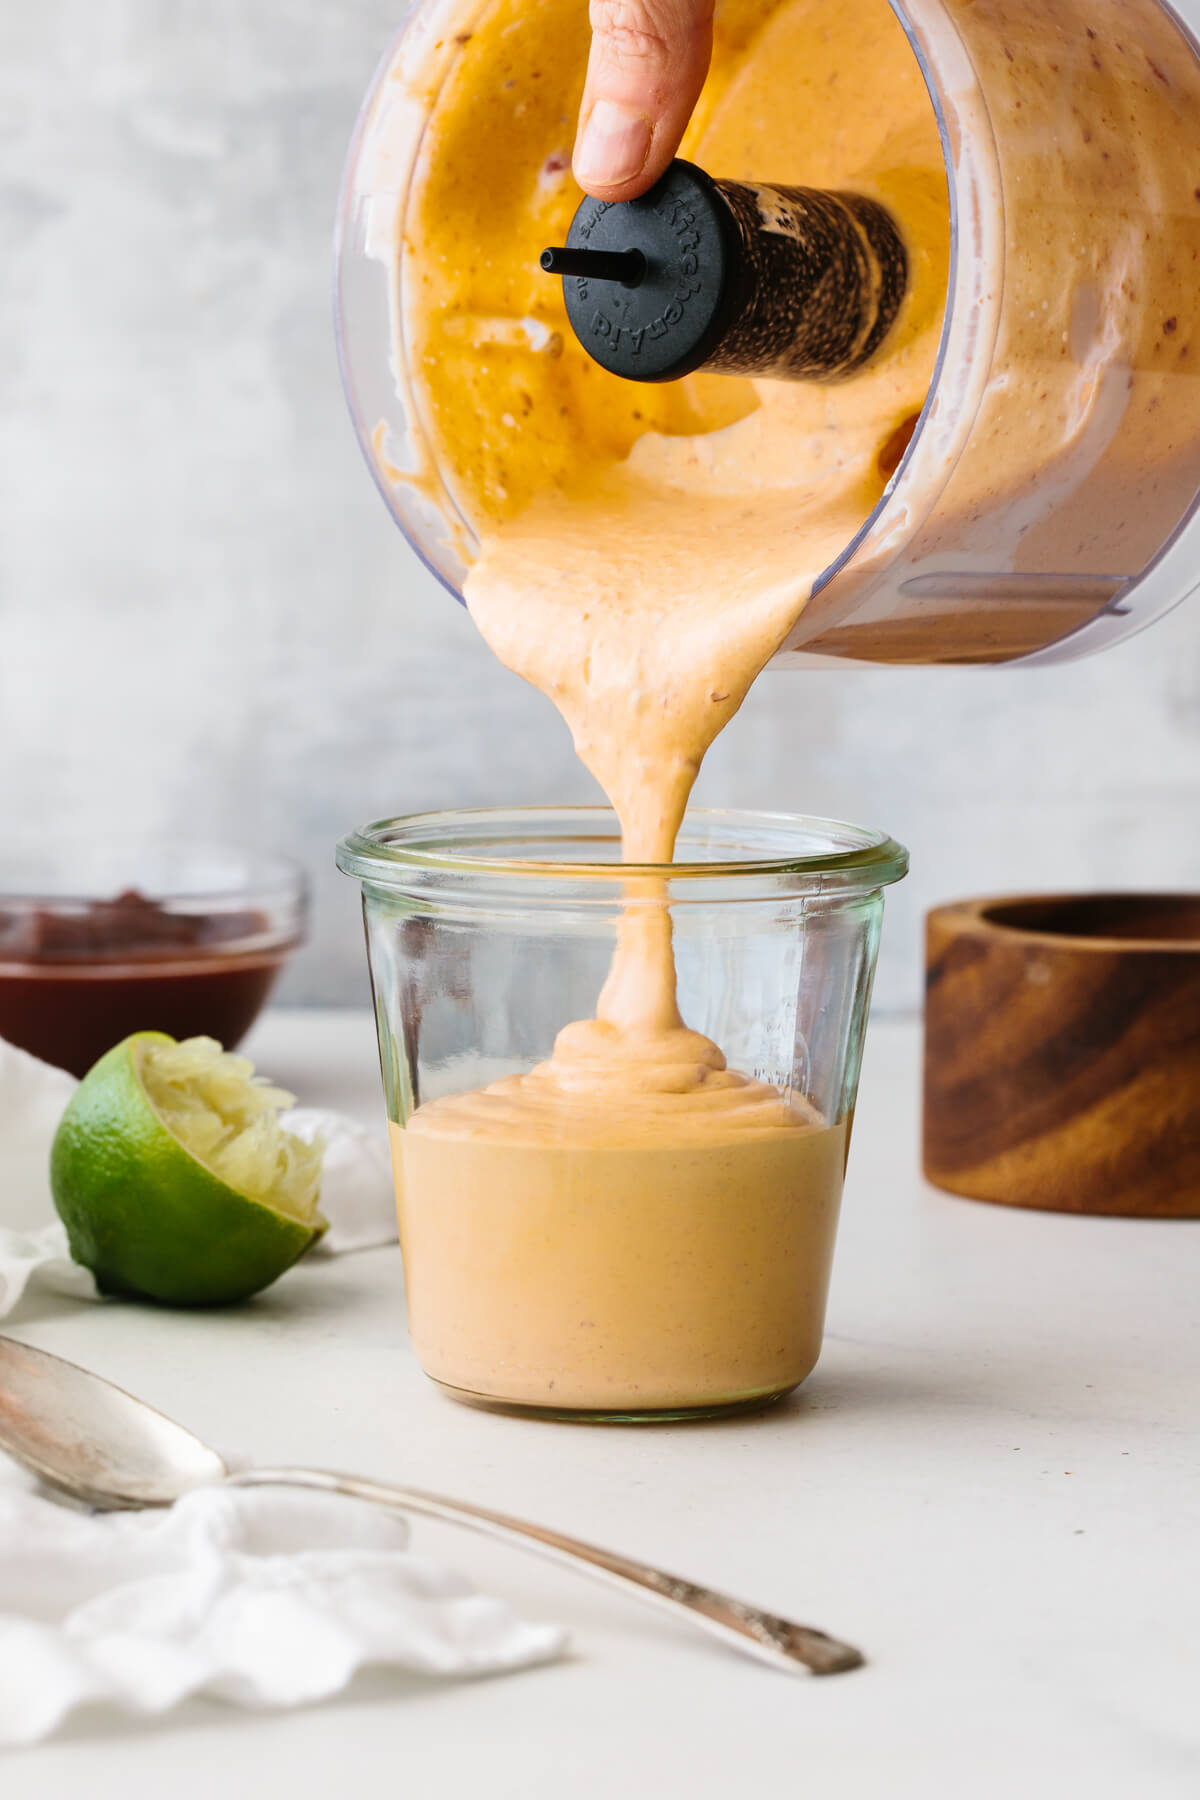 Pouring chipotle sauce from food processor into a glass jar.